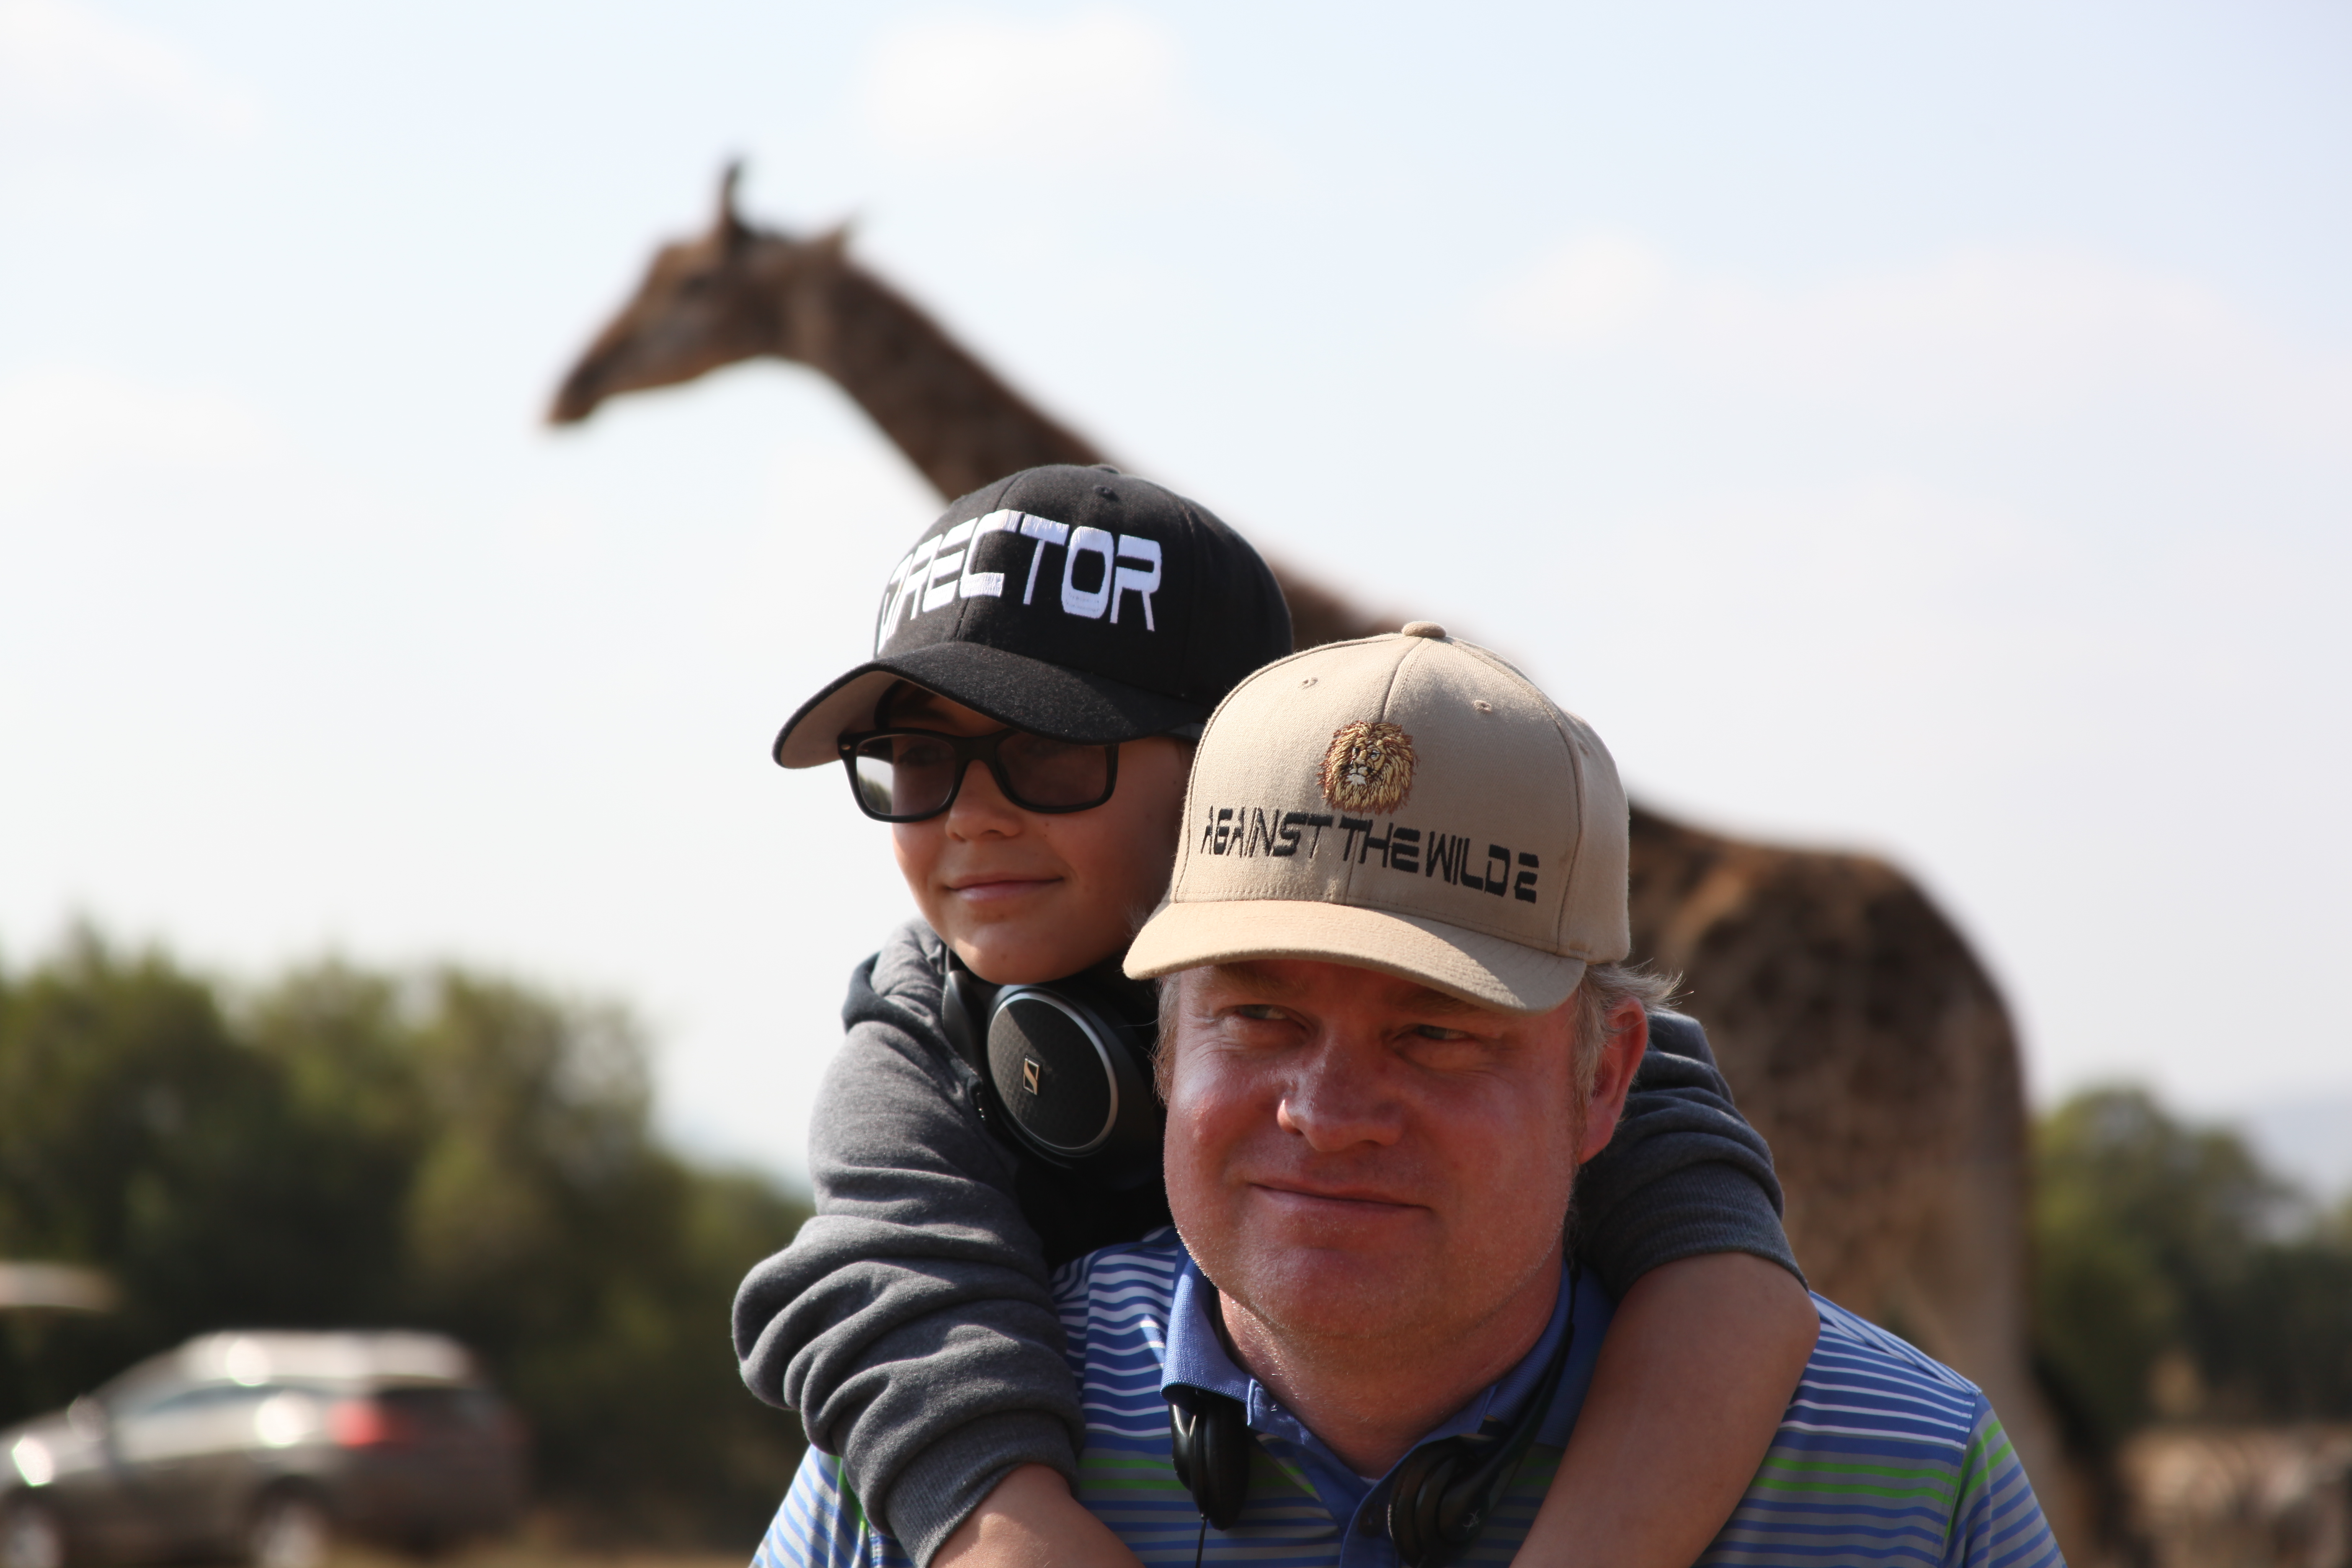 John Paul Ruttan and Richard Boddington, on the set of Against The Wild 2. South Africa, May 2015.